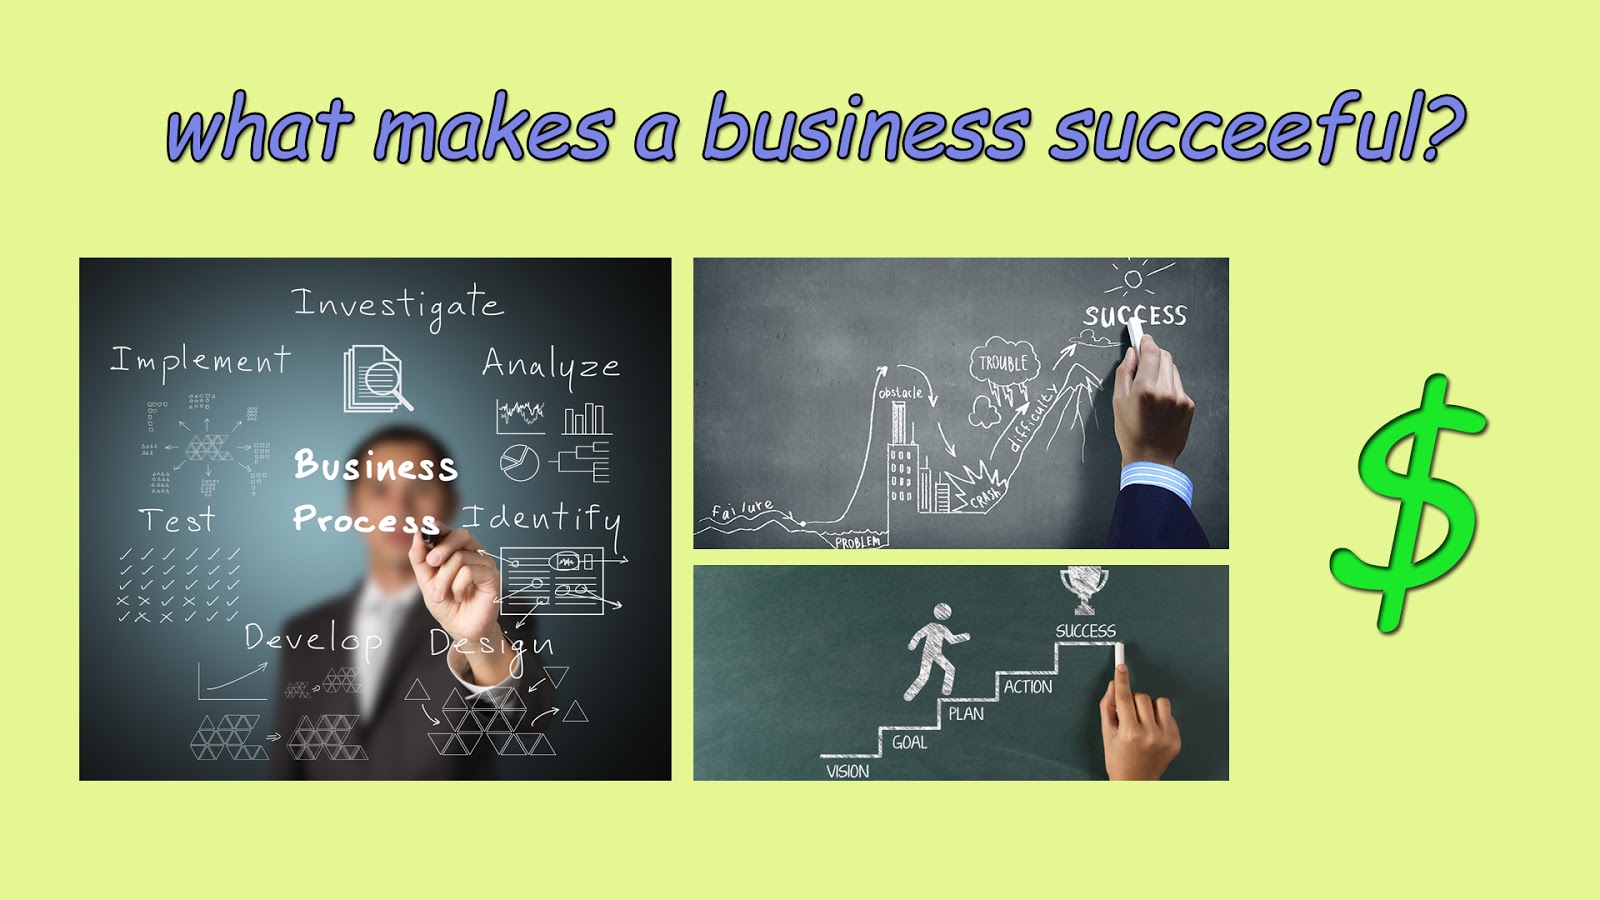 How To Make Your Business To Be Successful